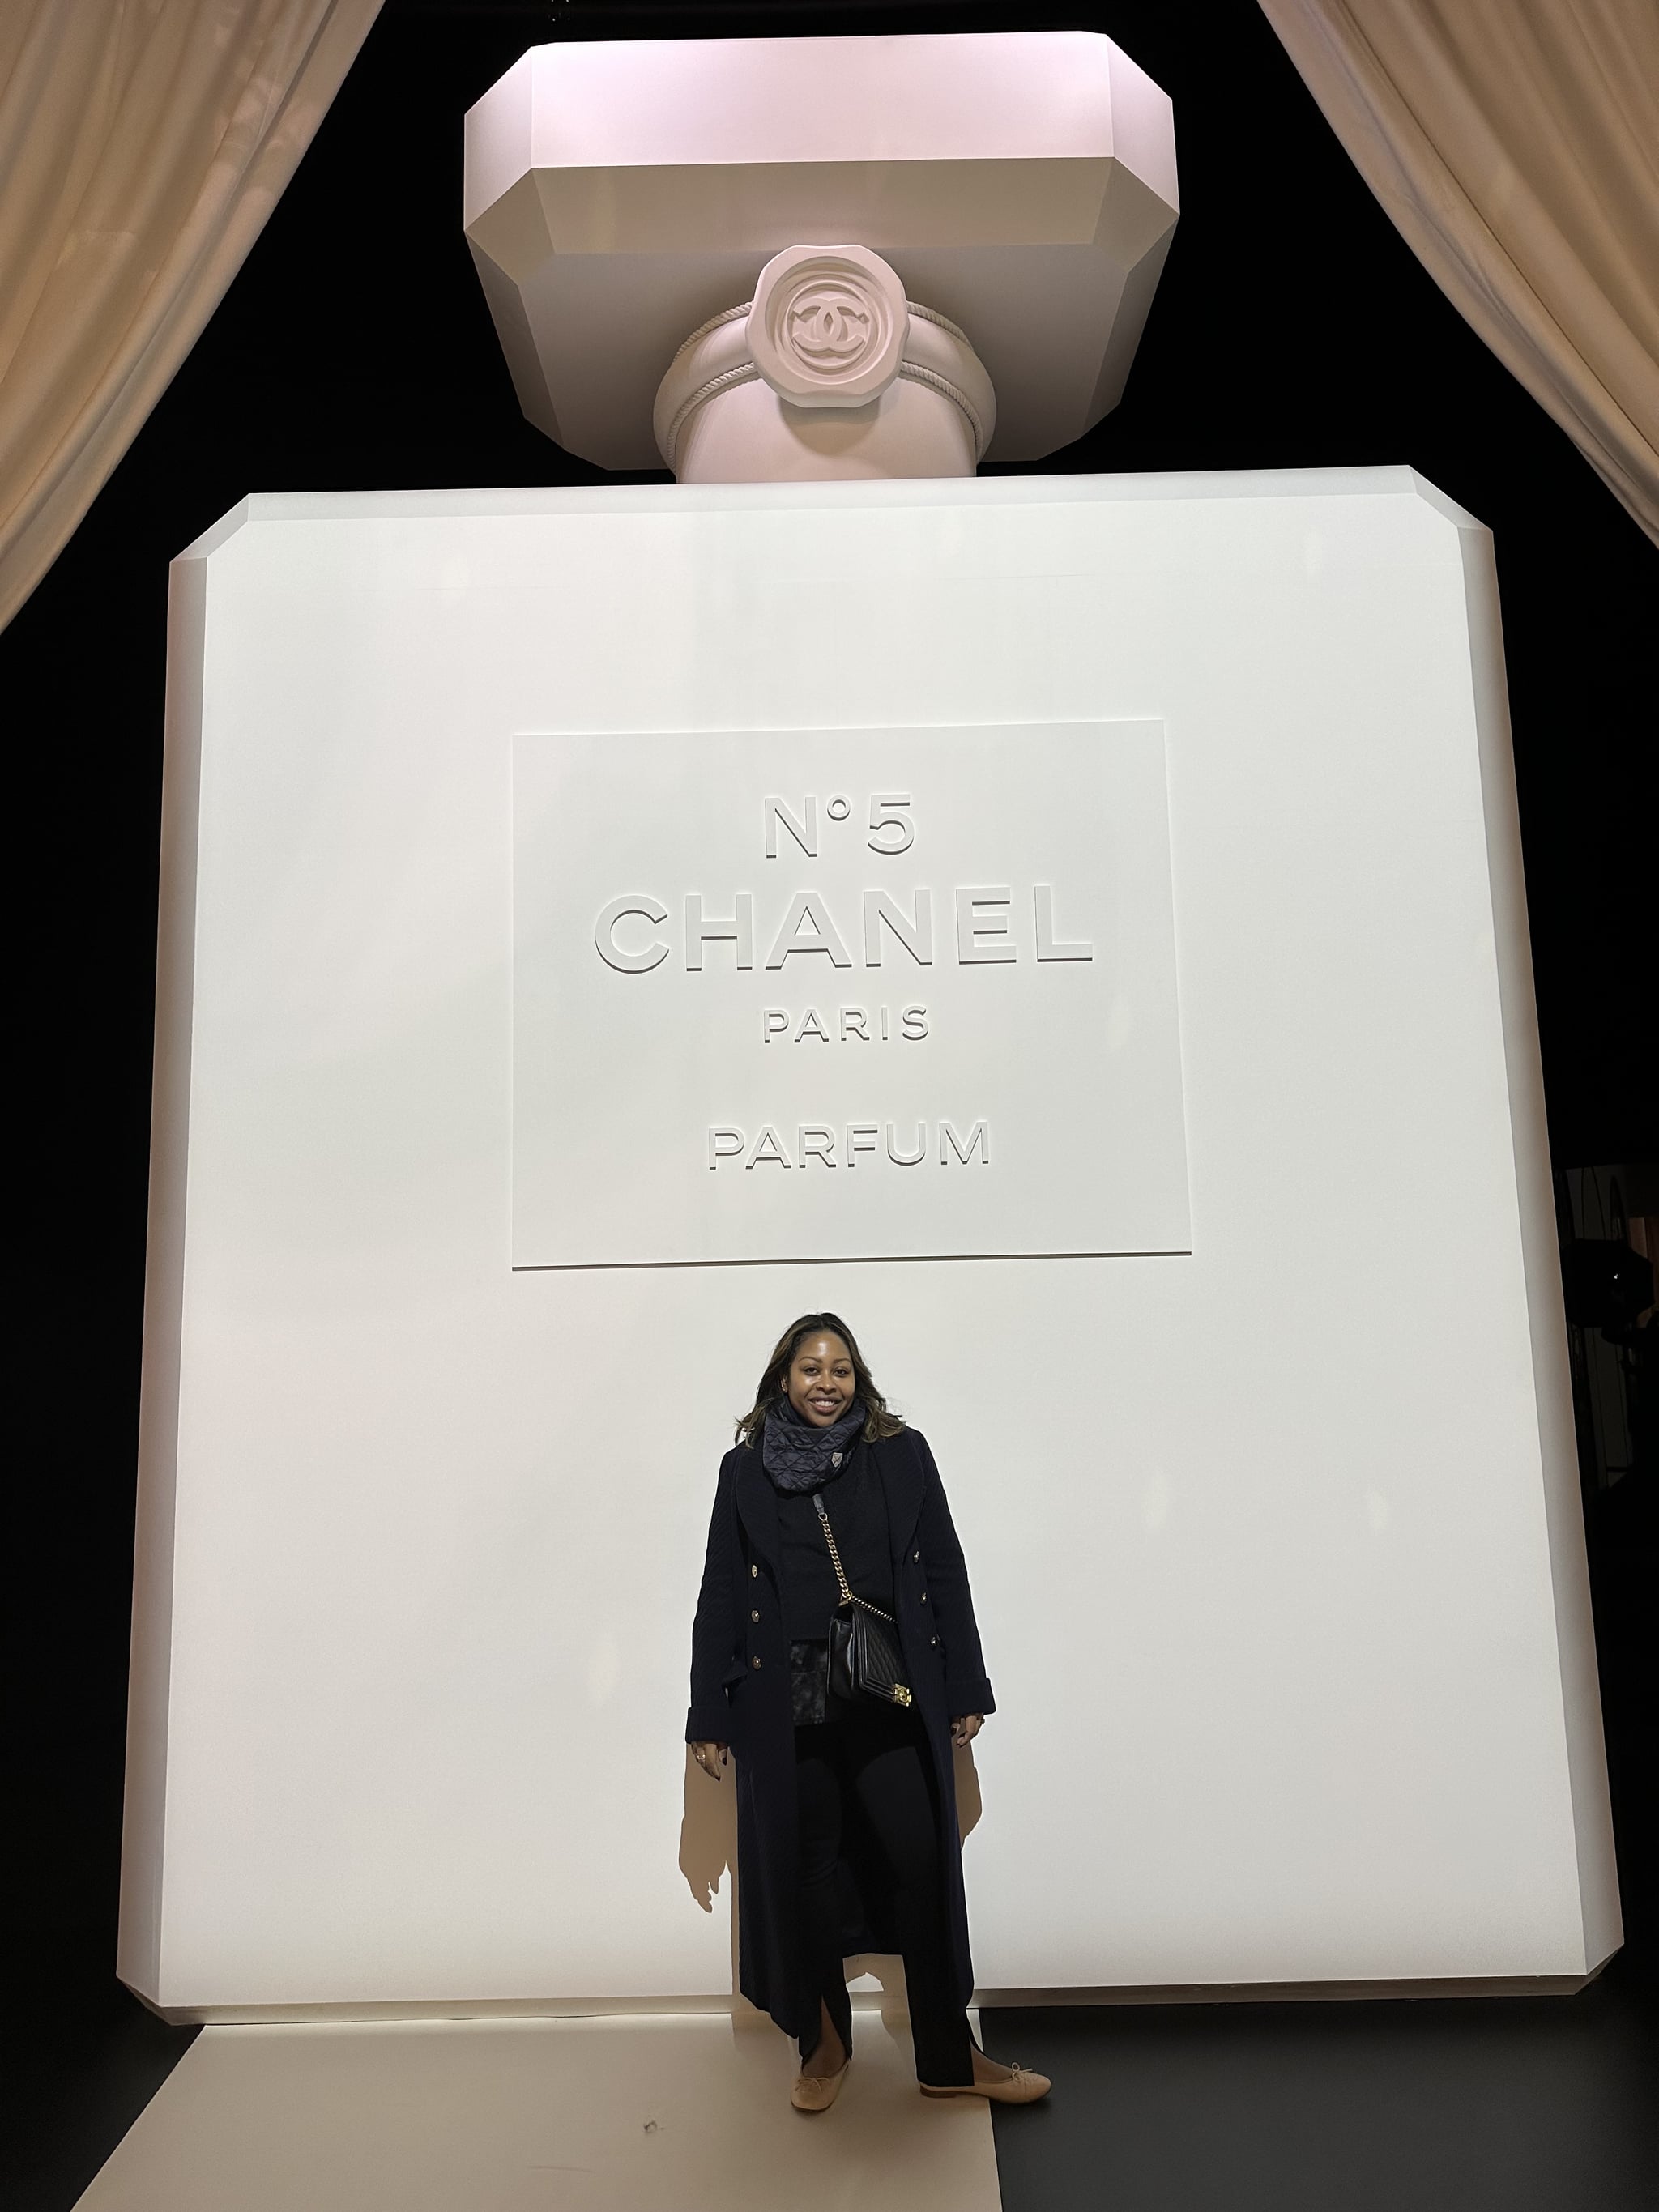 Sade Strehkle in front of Chanel No. 5 display in Paris.